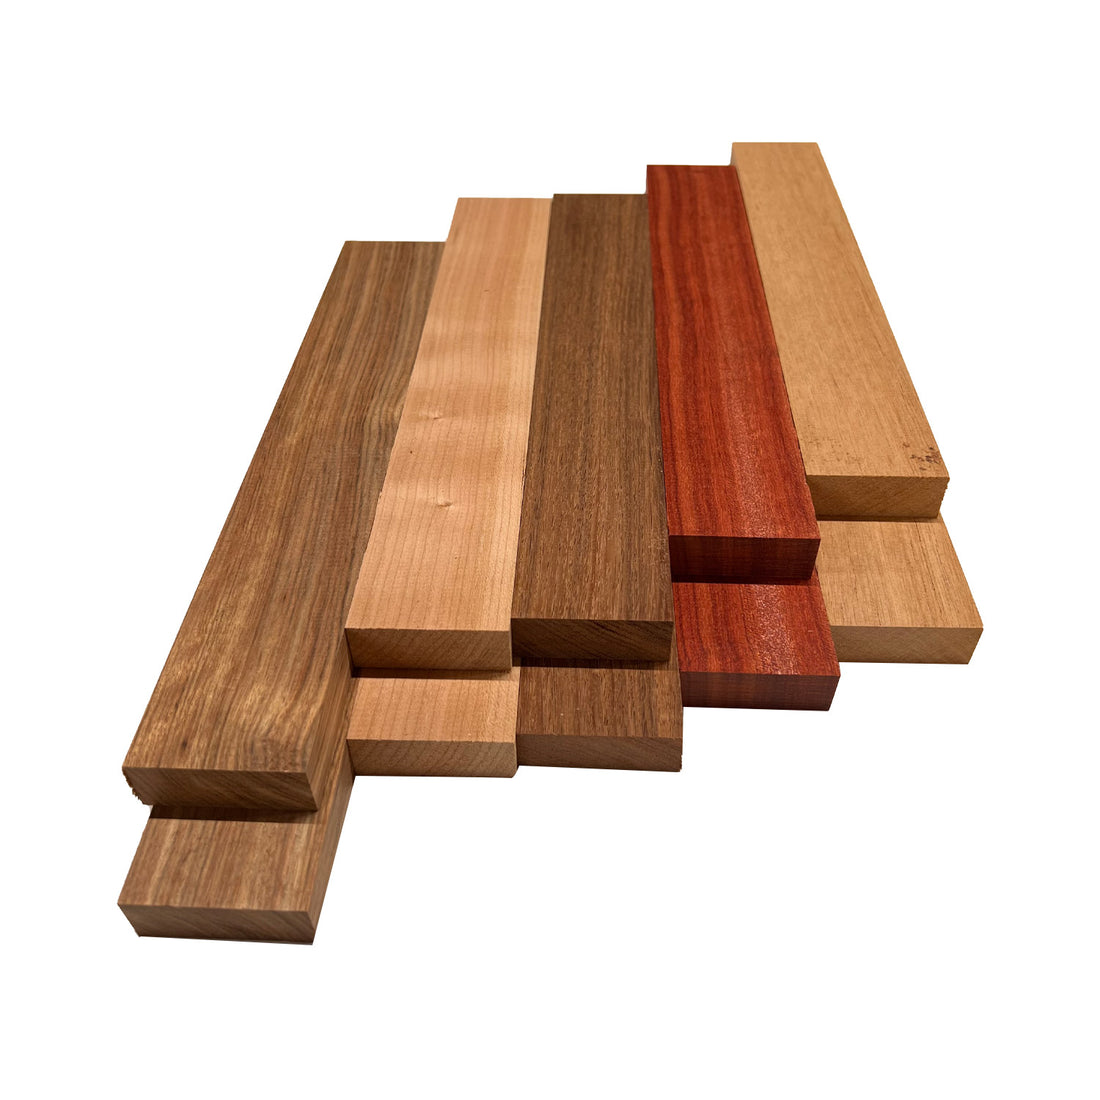 Pack of 10, Lumber Wood Board 3/4” x 2” x 12” (Chechen,Caribbean walnut,bloodwood,Mahogany,Cherry) - Exotic Wood Zone - Buy online Across USA 